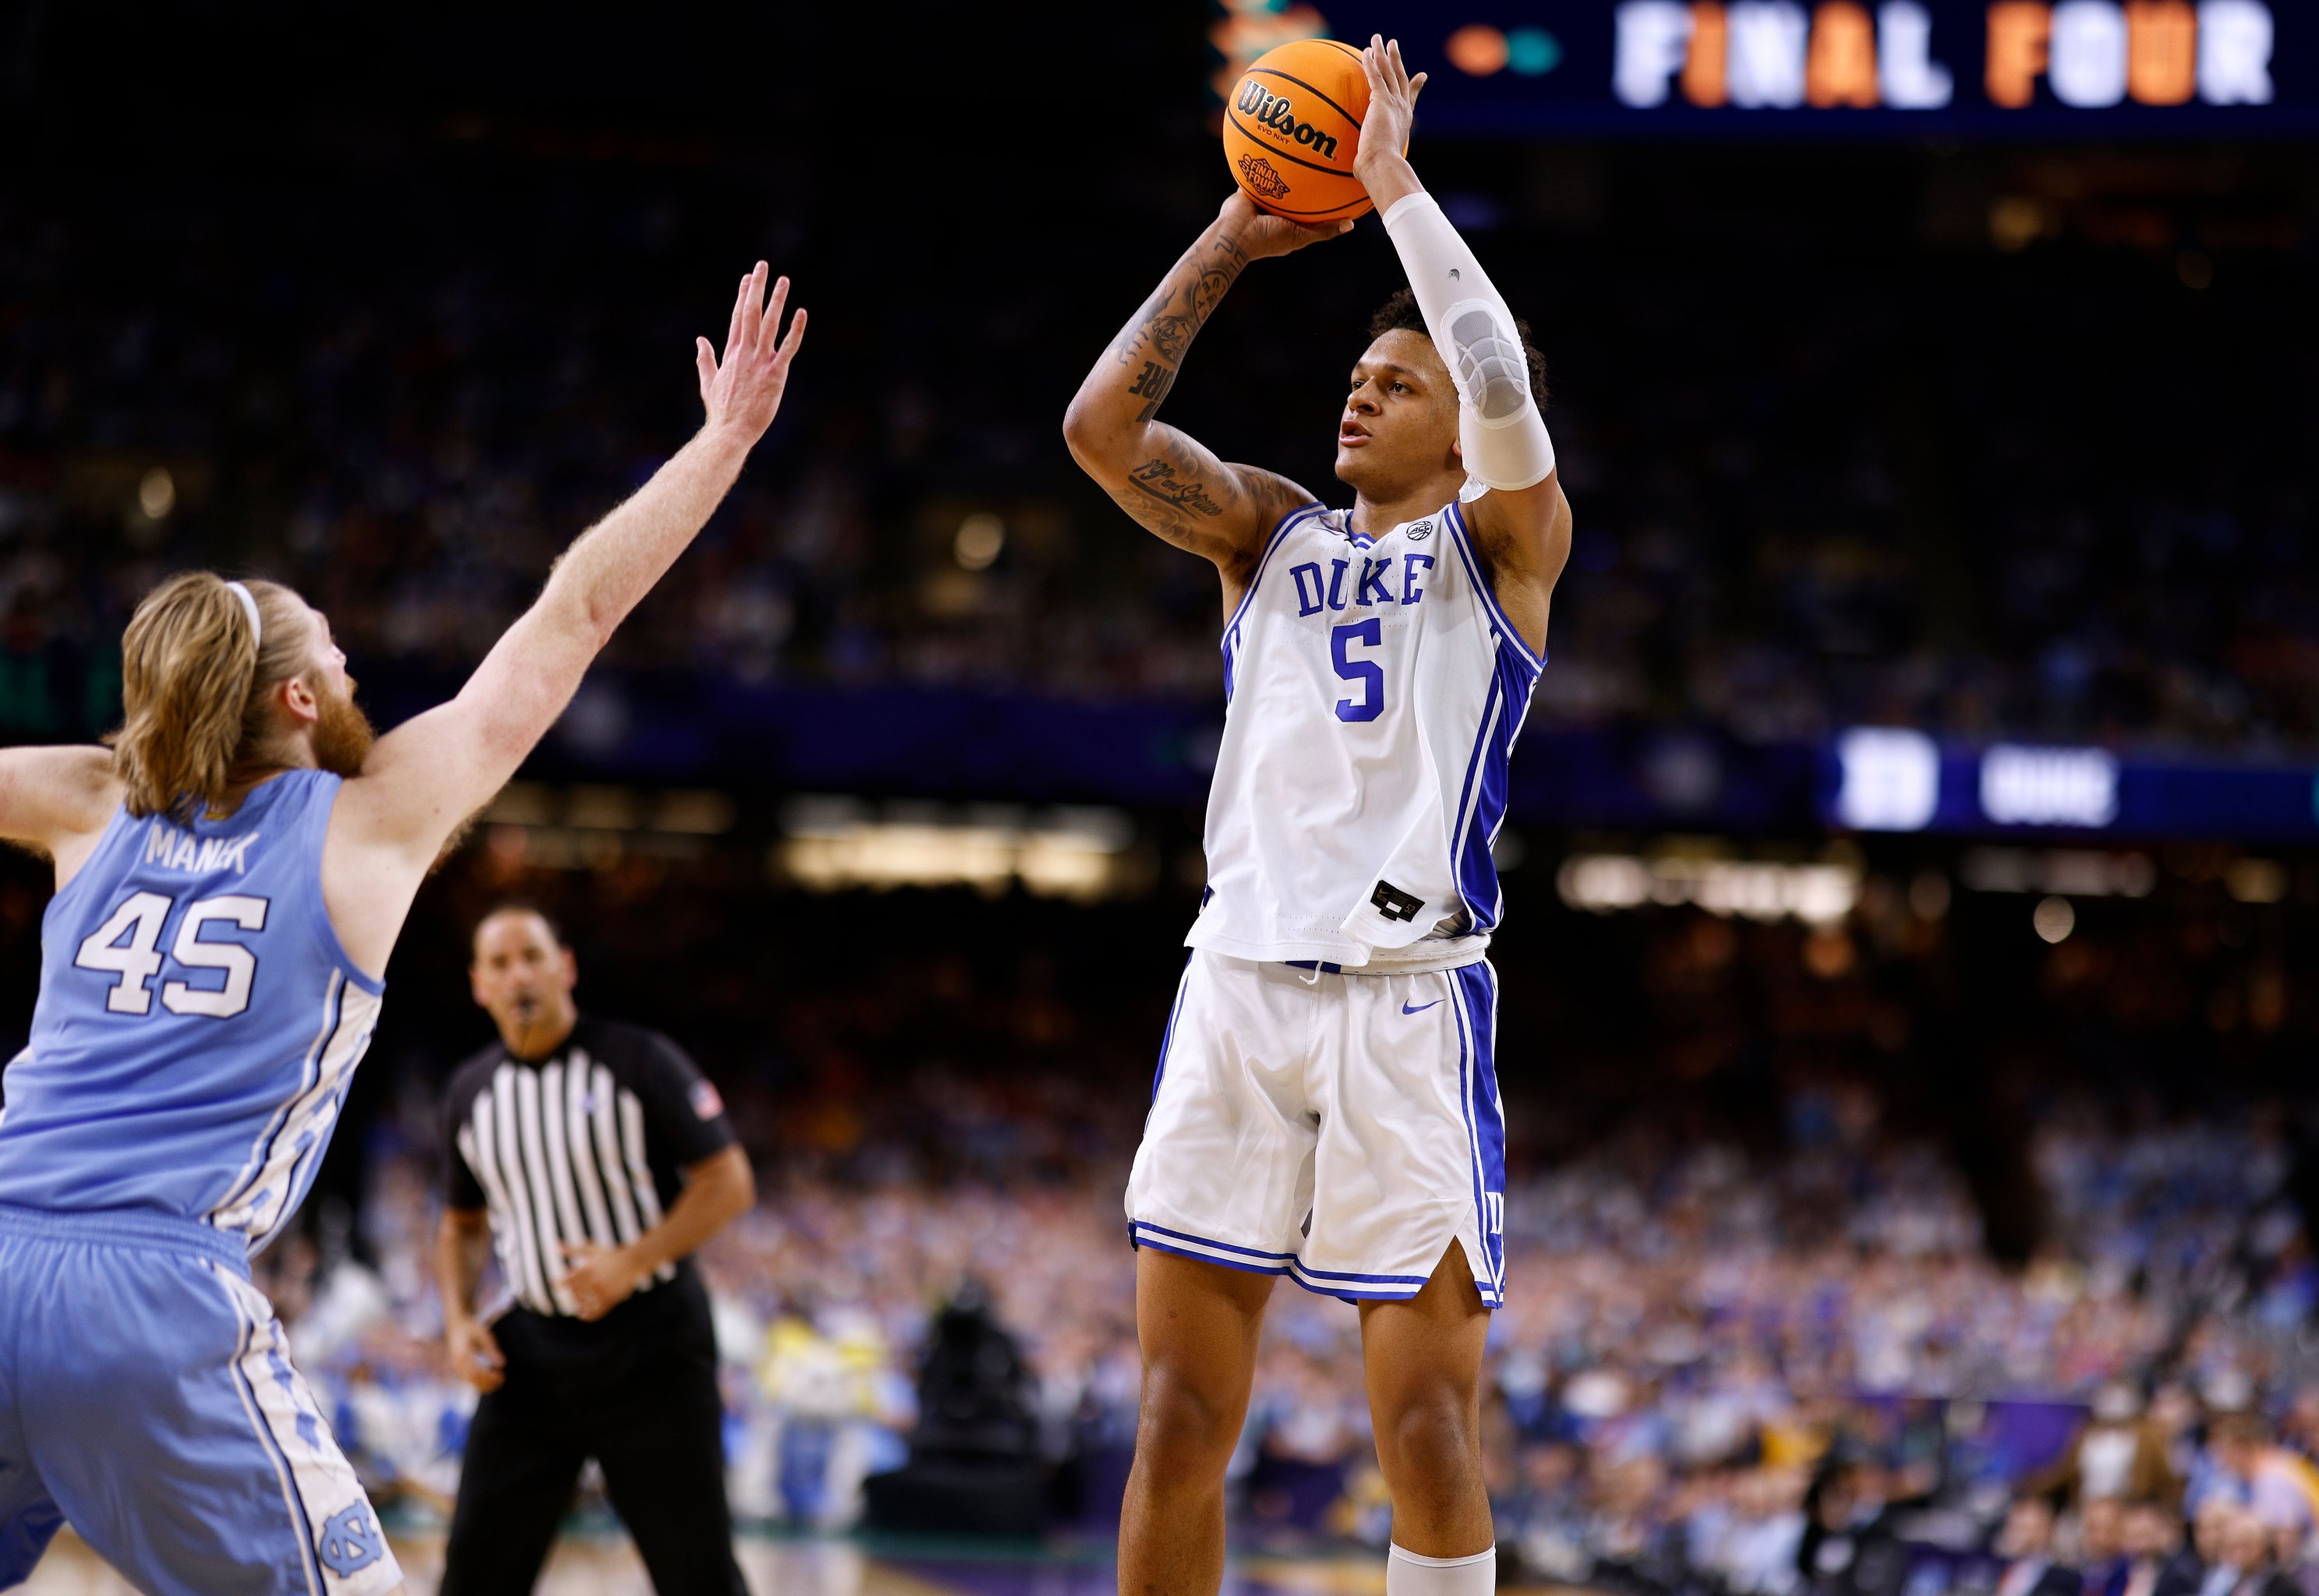 2022 Mock NBA Draft Post-Lottery: Entire Draft - 2 Rounds 